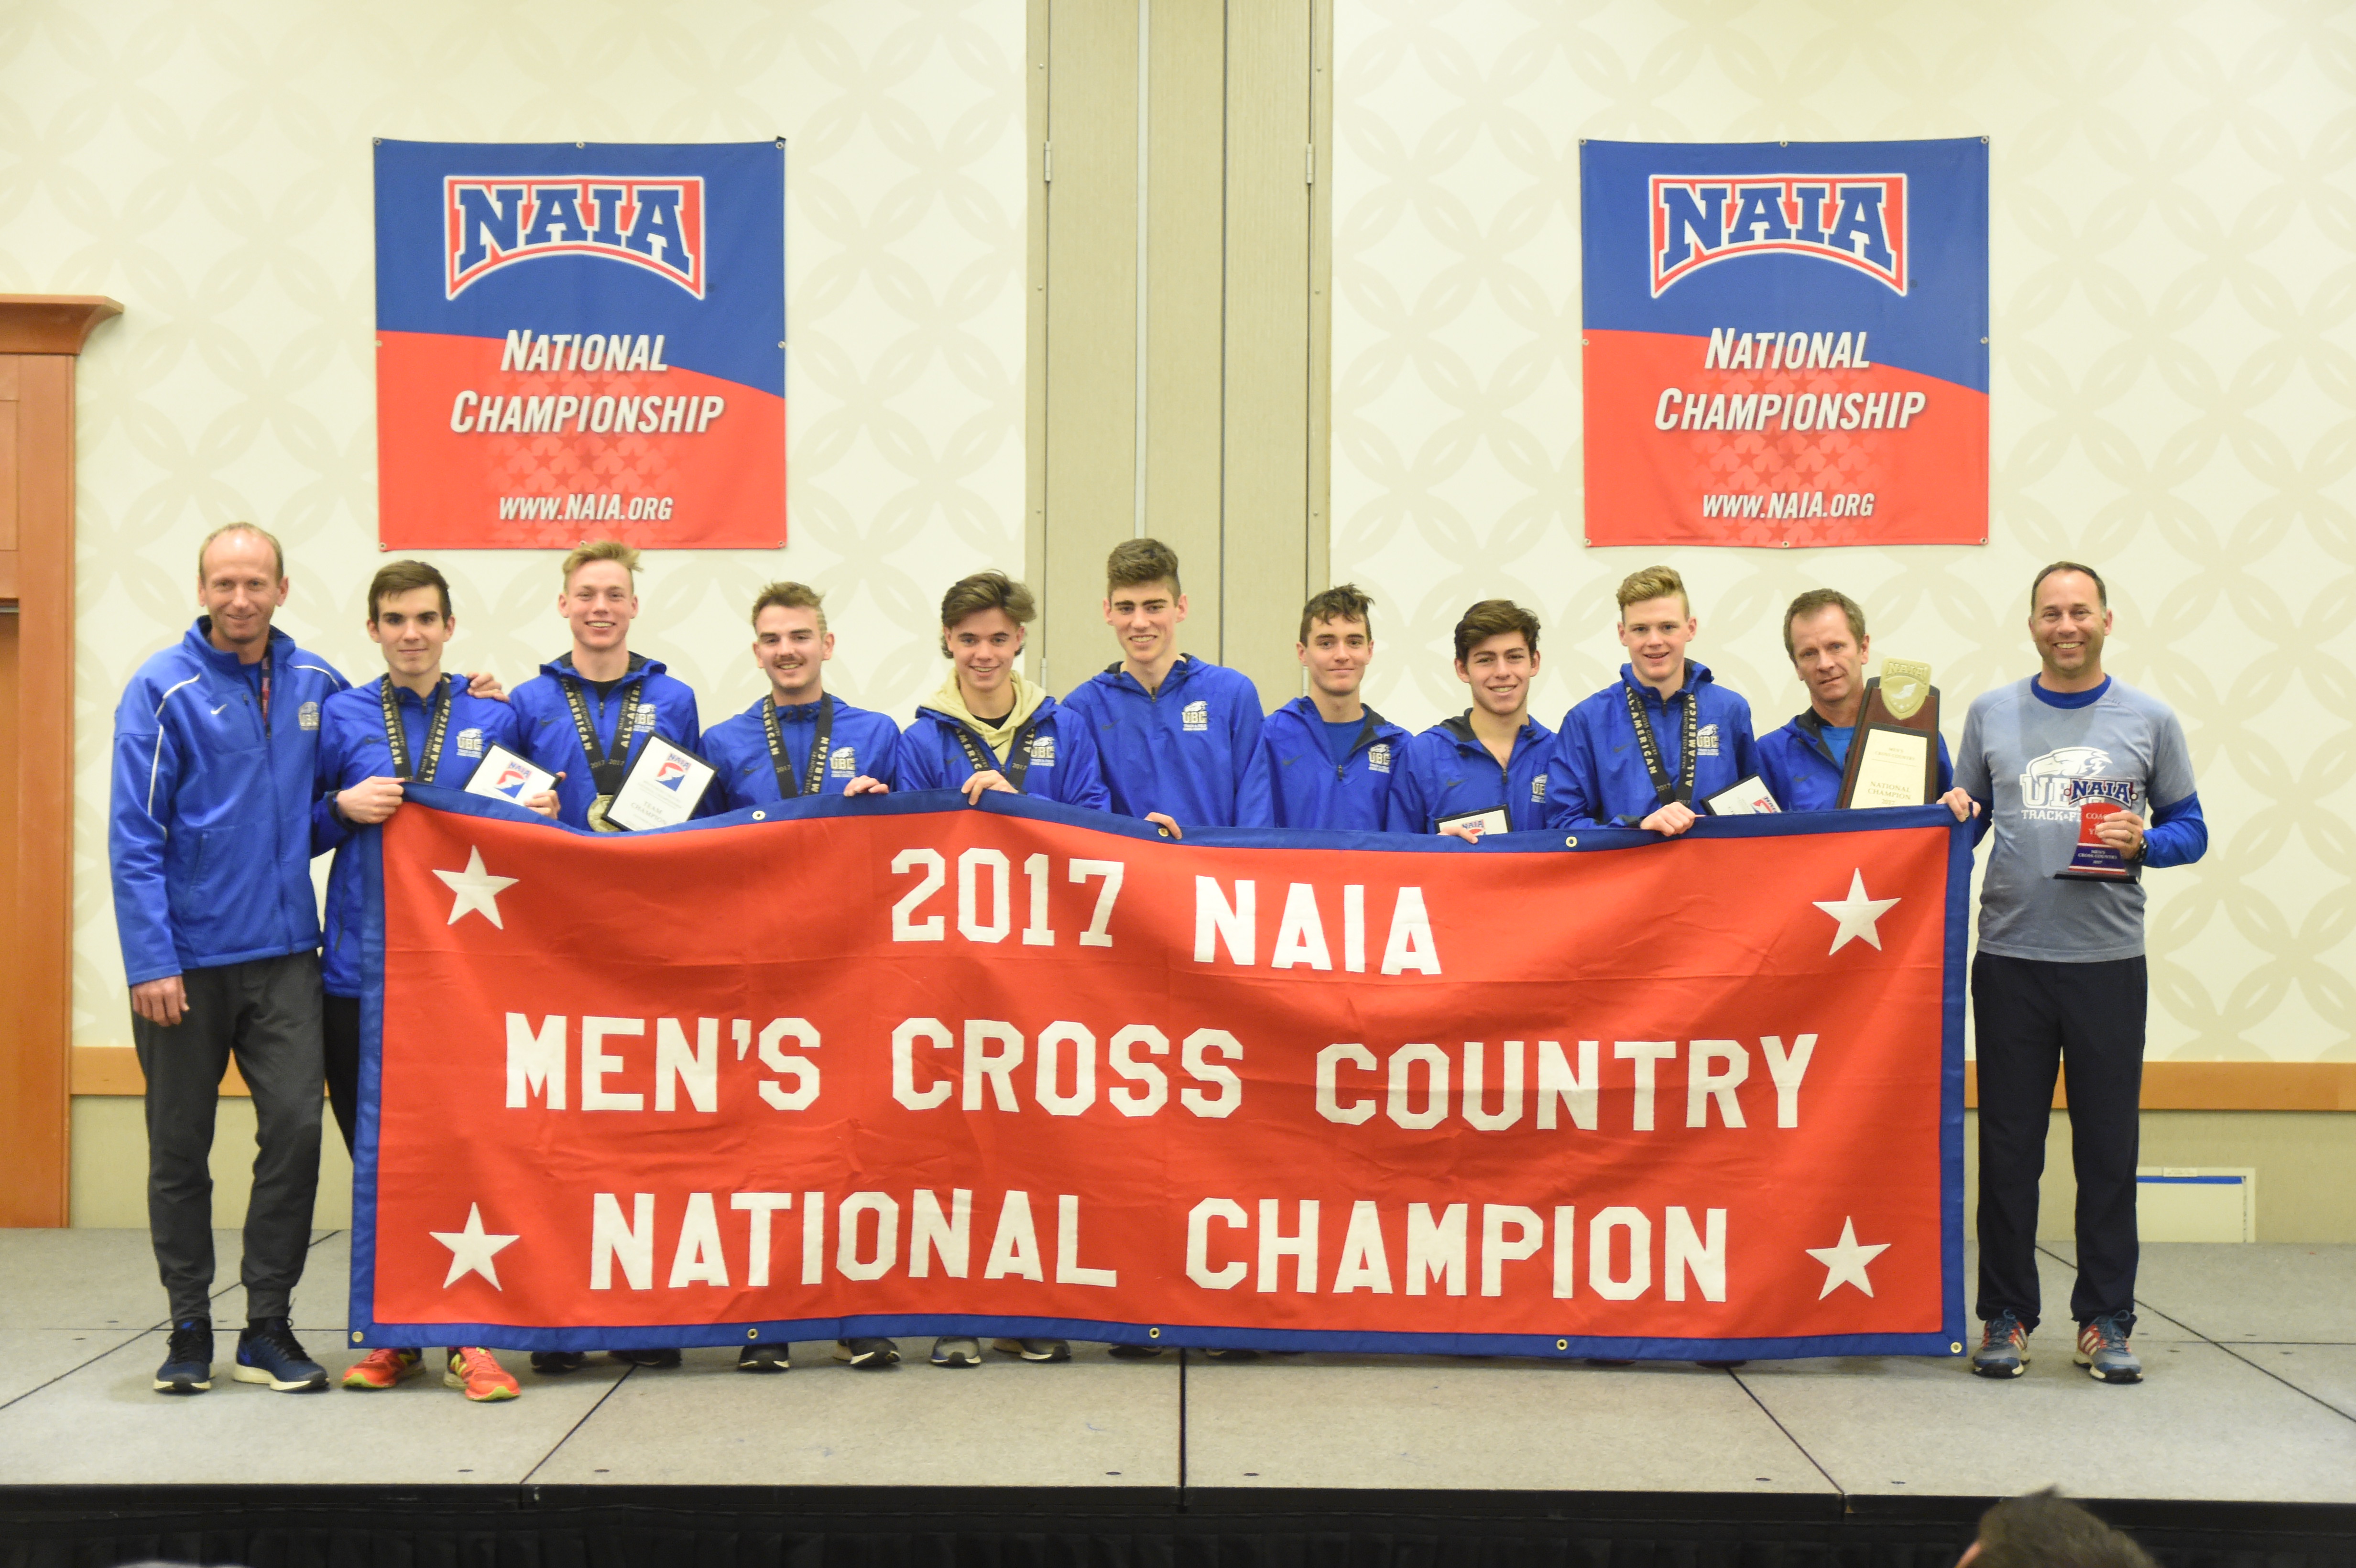 Winning formula Men and women’s cross country dominate the NAIA